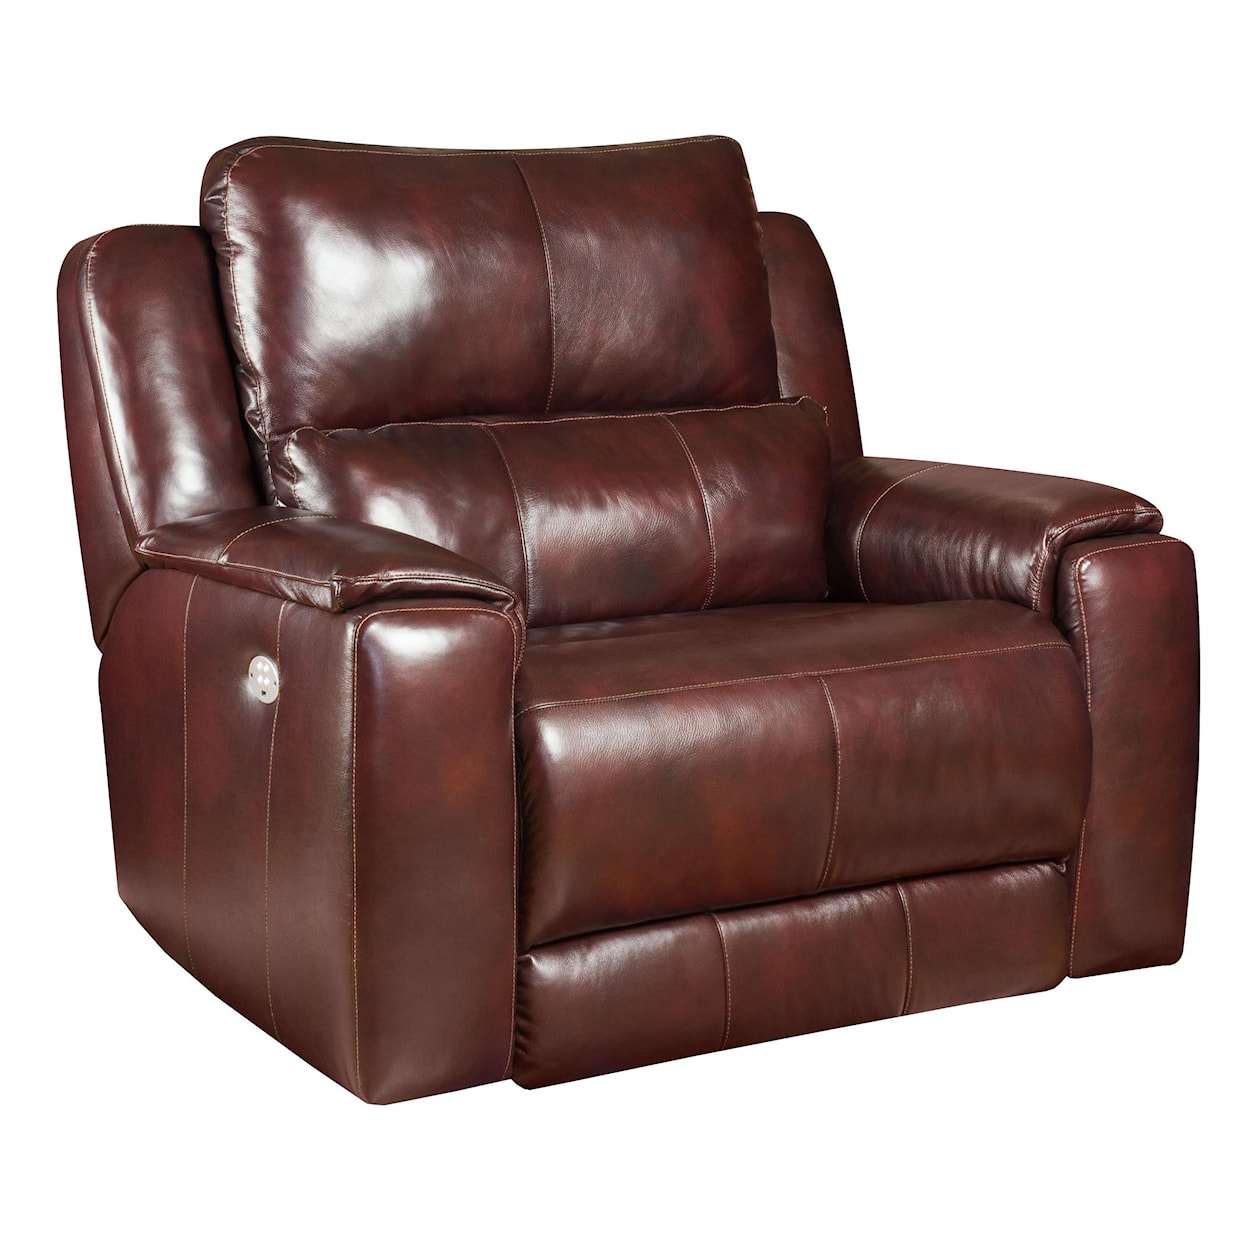 Southern Motion Dazzle Reclining Chair & 1/2 with Power Headrest